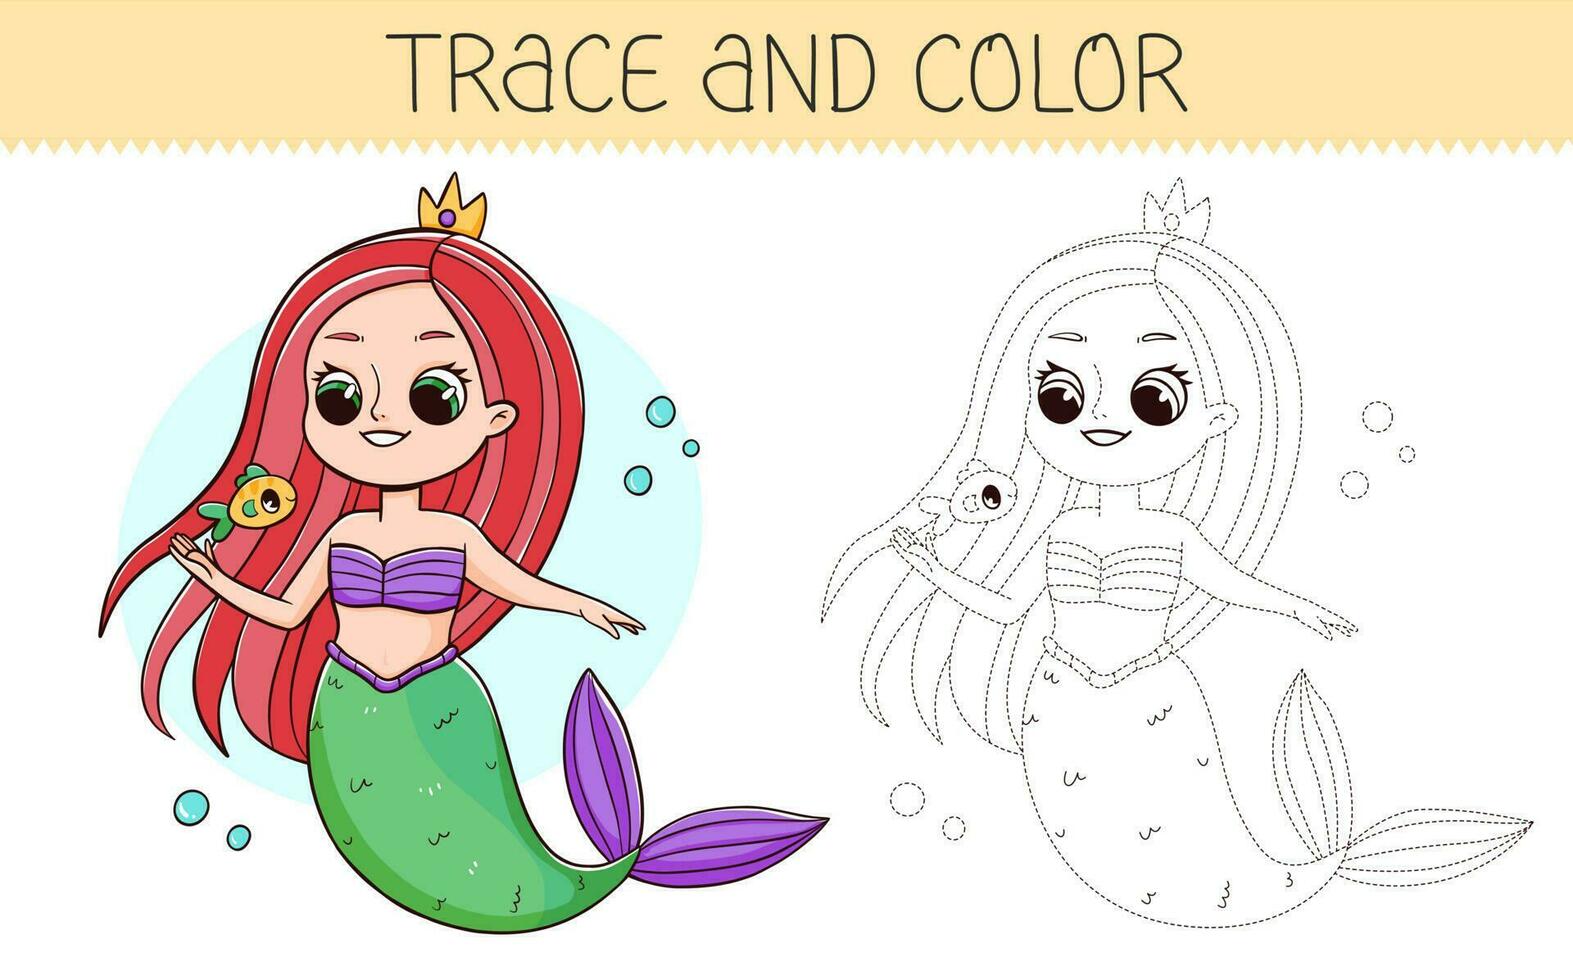 Trace and color coloring book with cute mermaid for kids. Coloring page with cartoon mermaid. Vector illustration.